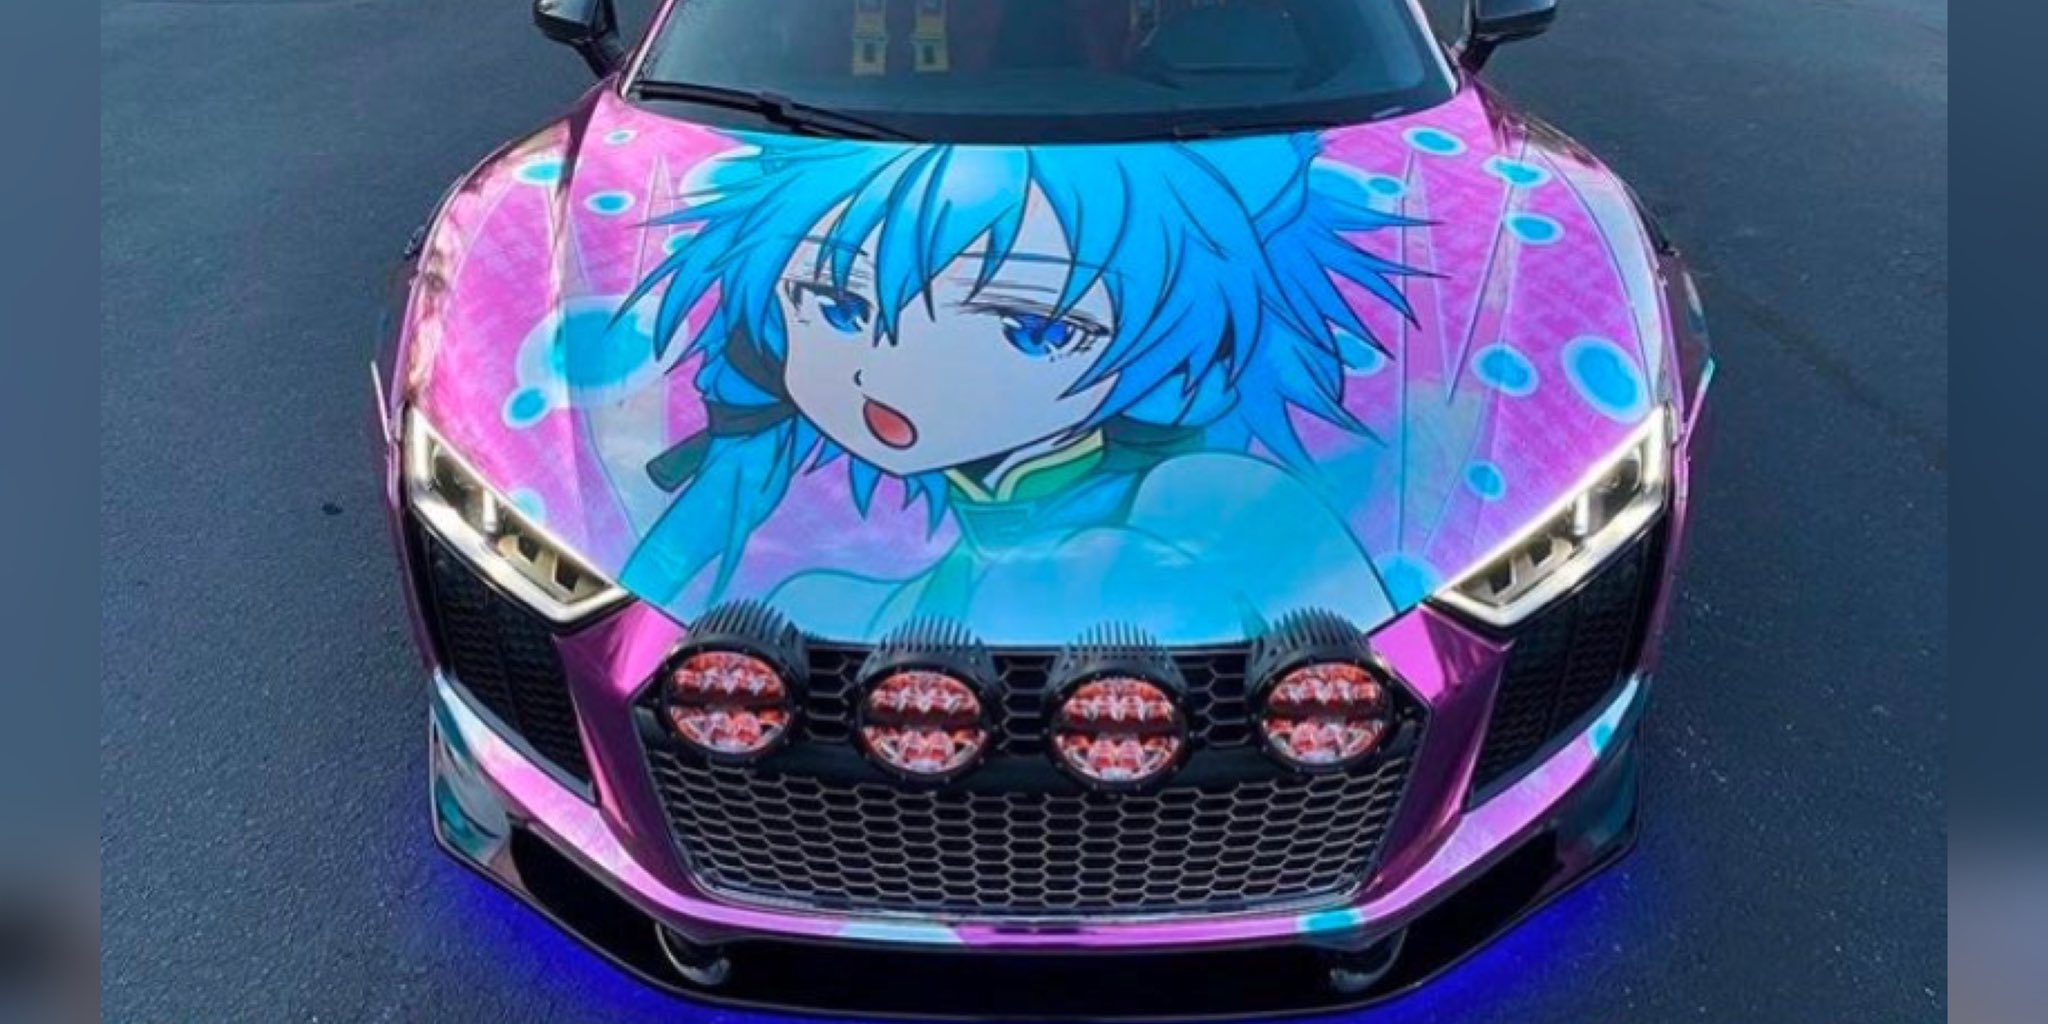 Dripjutsu  on Twitter Lil Uzi riding cars with anime on it and Im  still being called a weeb for watching Avatar the Last Airbender  httpstcoSoliBzmakL  Twitter